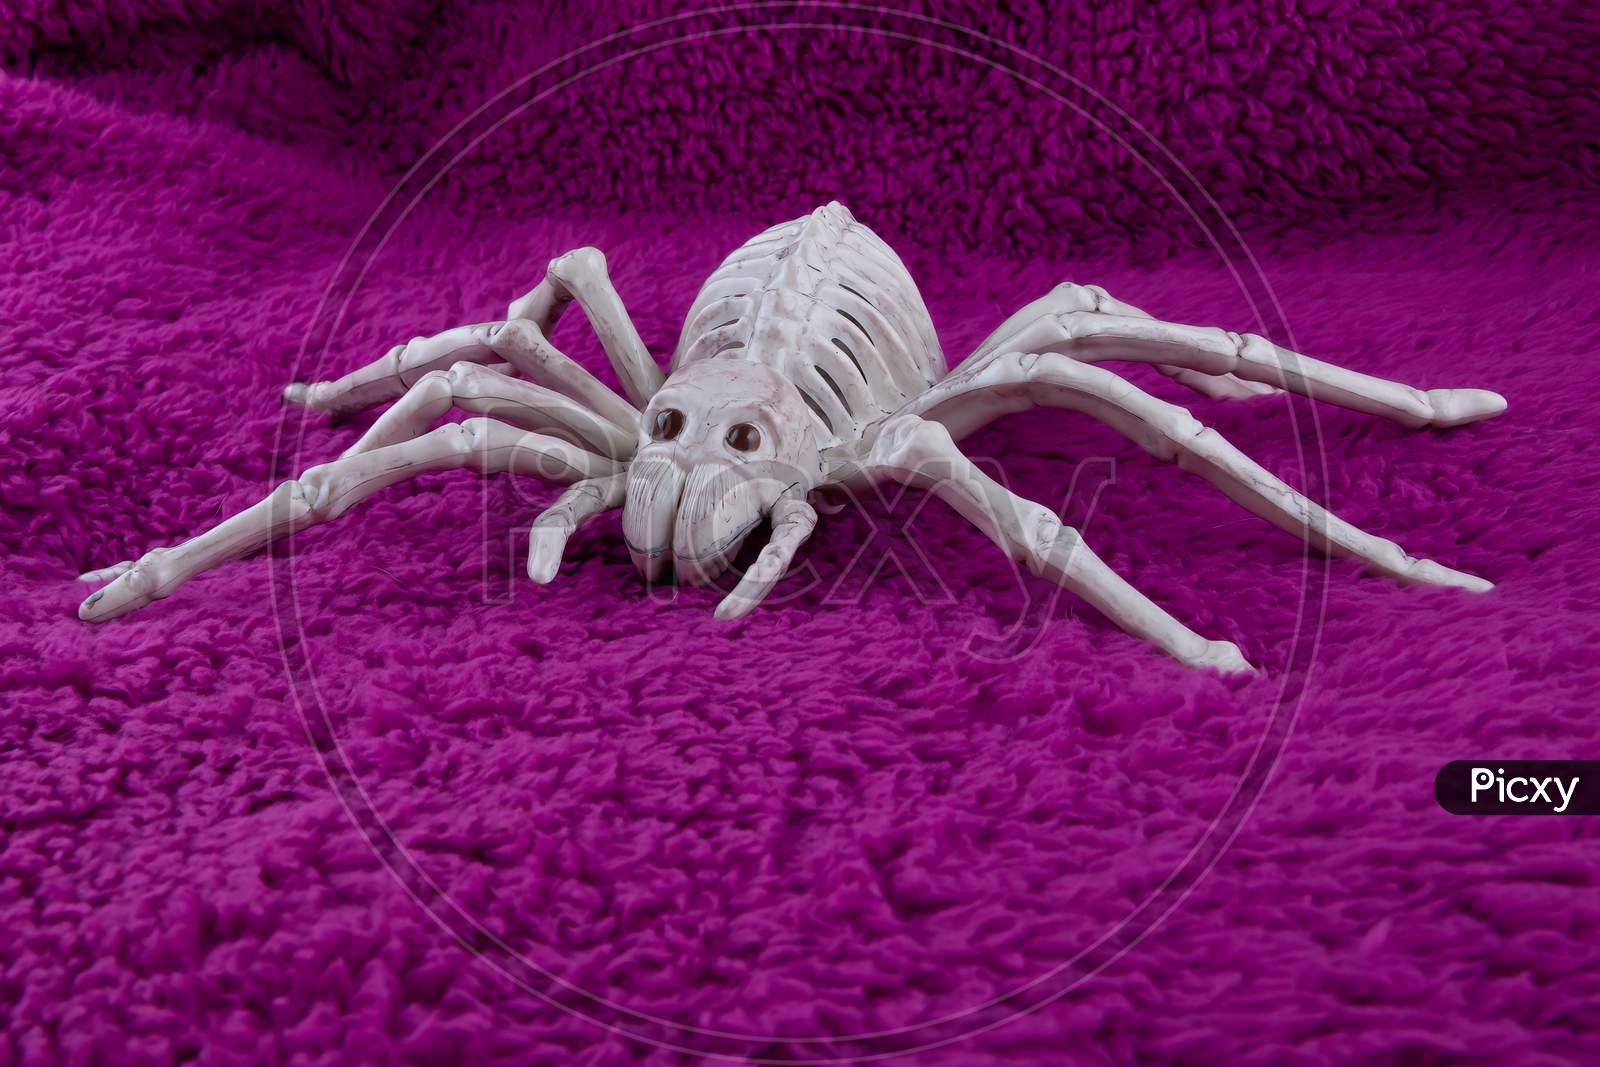 Scary Spider Skeleton  With Black Eyes On Fluffy Purple Background. Concept For Creepy Halloween